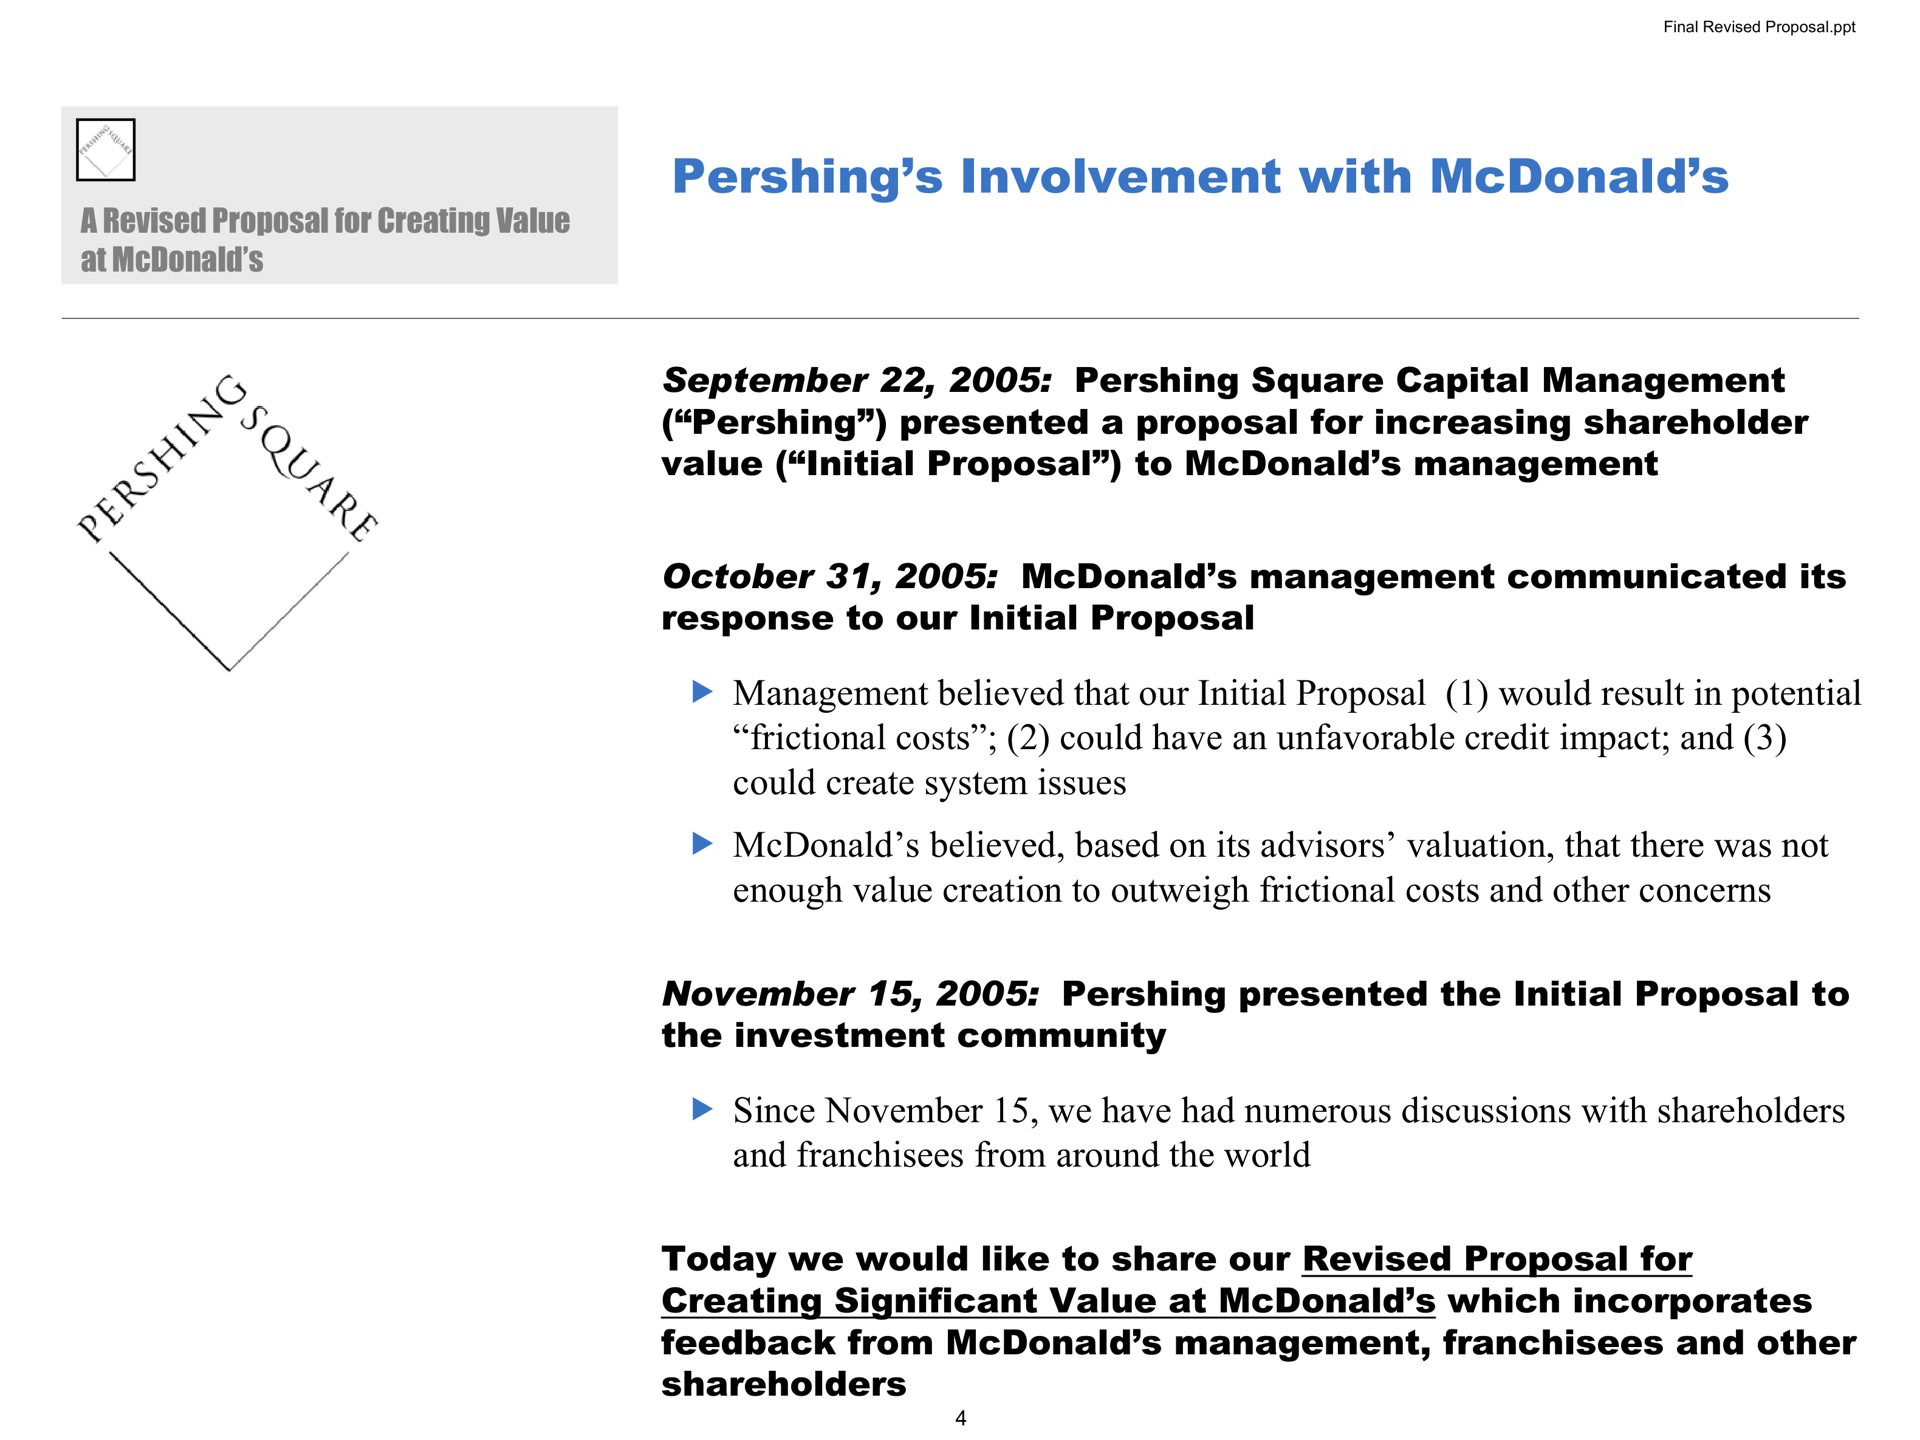 involvement with square capital management presented a proposal for increasing shareholder value initial proposal to management management communicated its response to our initial proposal management believed that our initial proposal would result in potential frictional costs could have an unfavorable credit impact and could create system issues believed based on its advisors valuation that there was not enough value creation to outweigh frictional costs and other concerns presented the initial proposal to the investment community since we have had numerous discussions with shareholders and franchisees from around the world today we would like to share our revised proposal for creating significant value at which incorporates feedback from management franchisees and other shareholders | Pershing Square